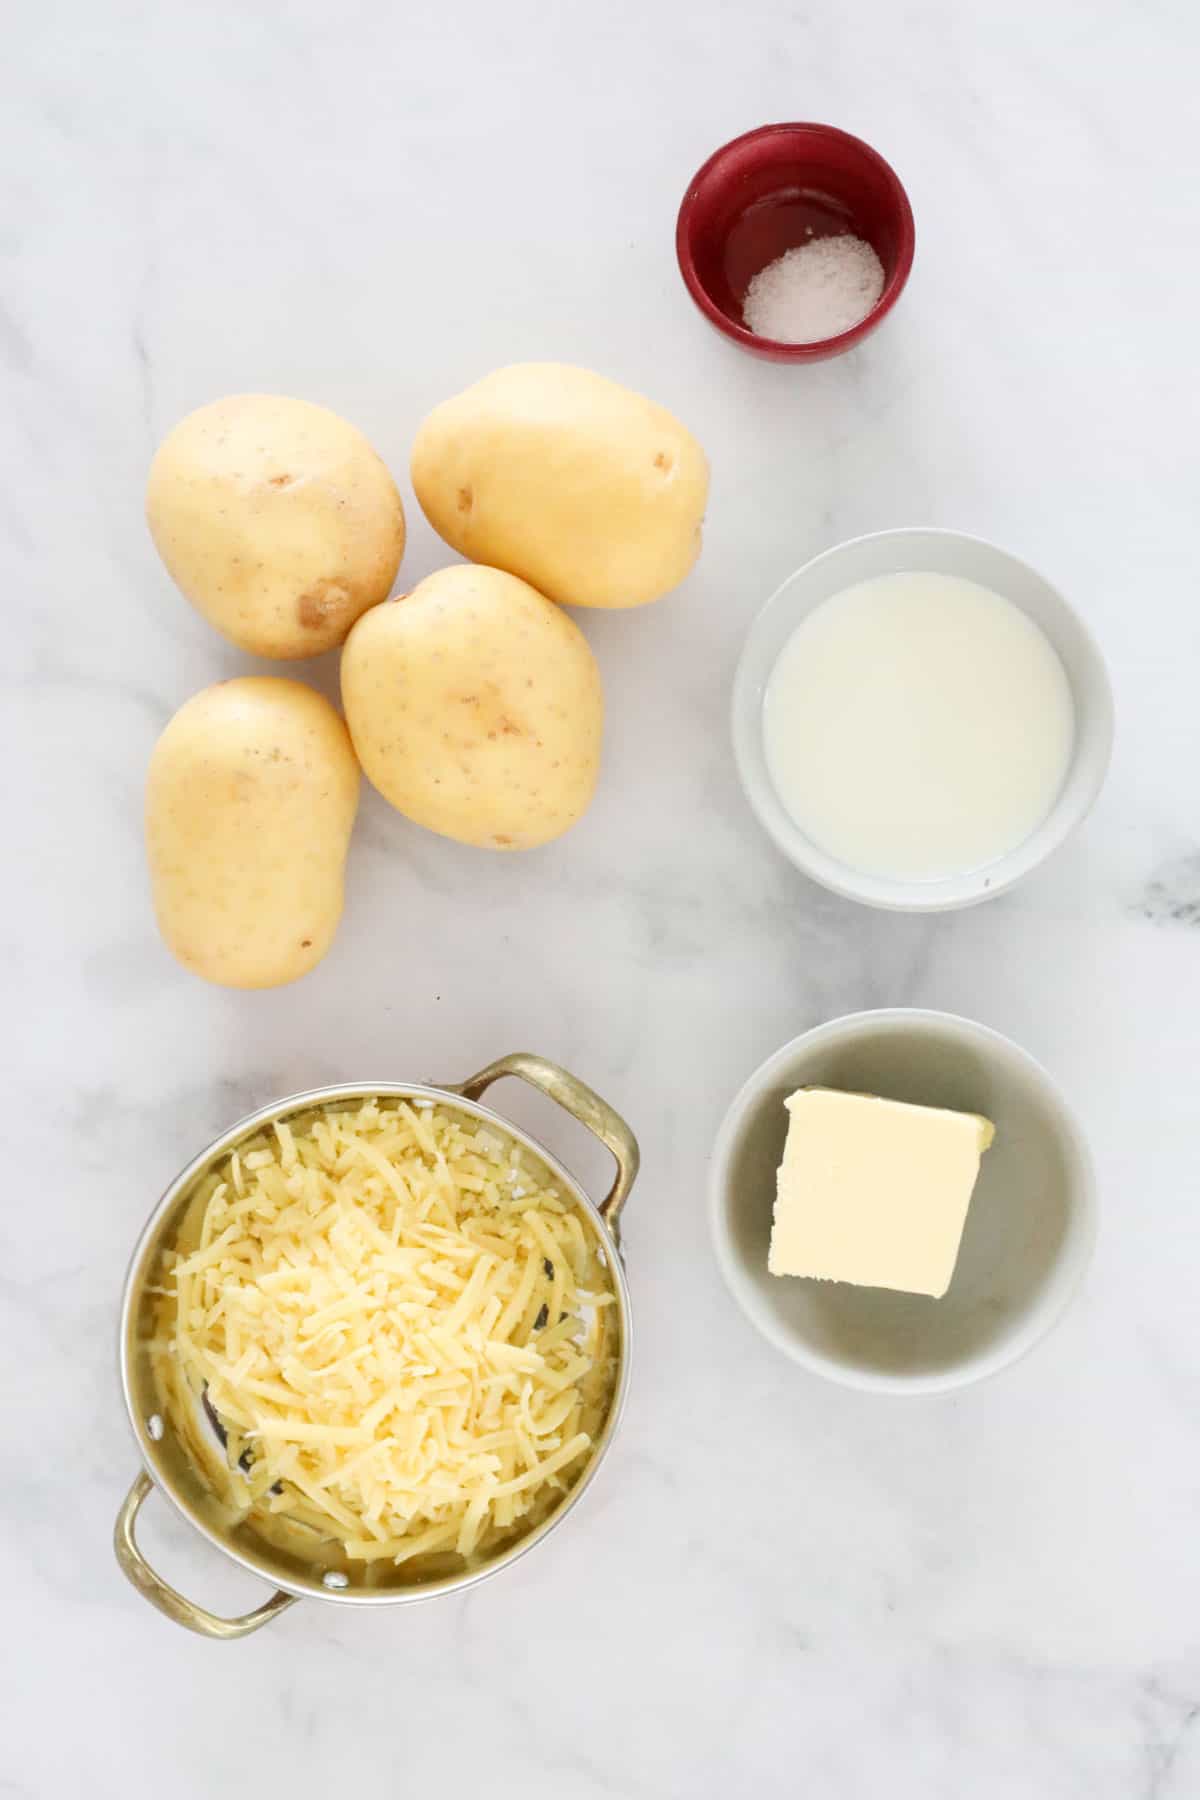 The ingredients for cheesy mashed potato.